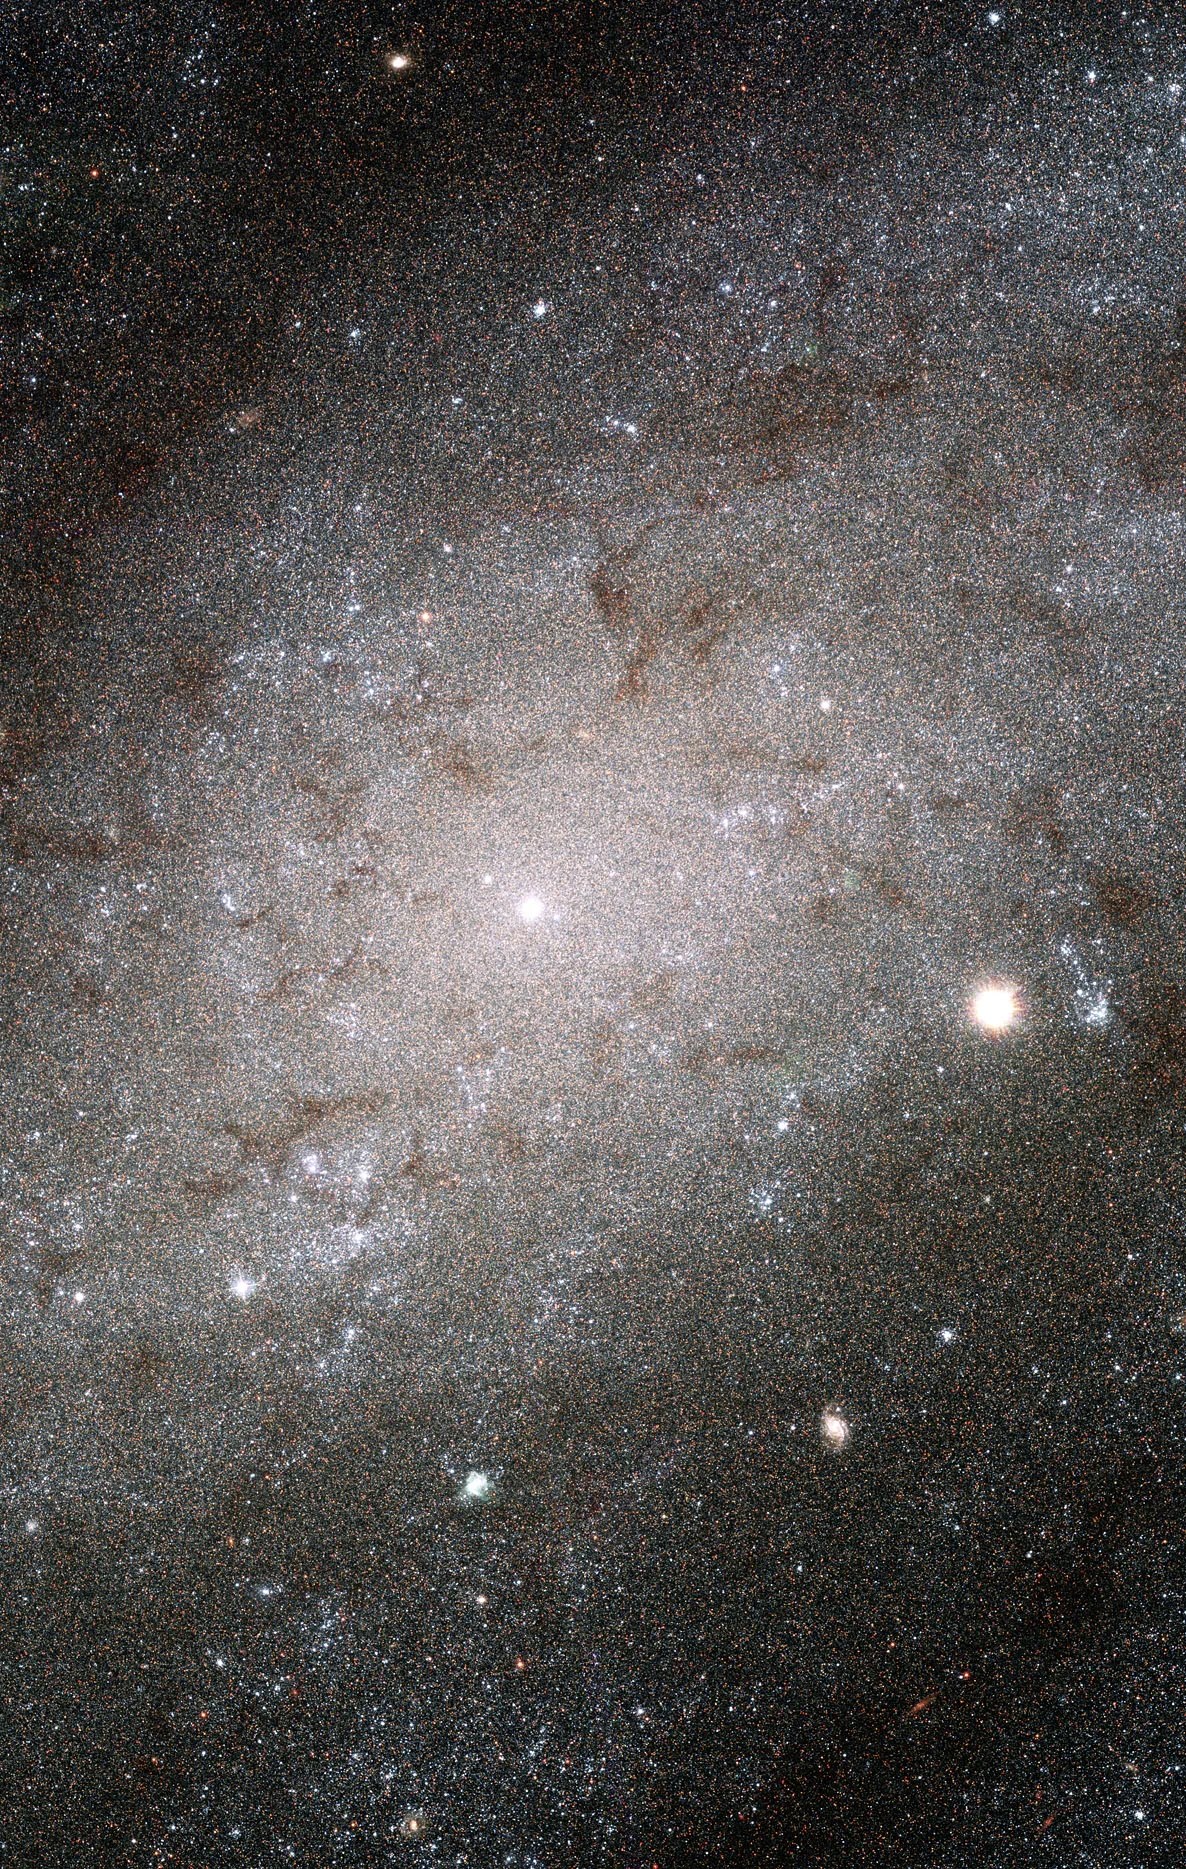 The very center of the galaxy glows bright white. All around it, the white stars of its spiral arms resemble grains of sand. There are scattered dark tufts of dust and gas scattered throughout.